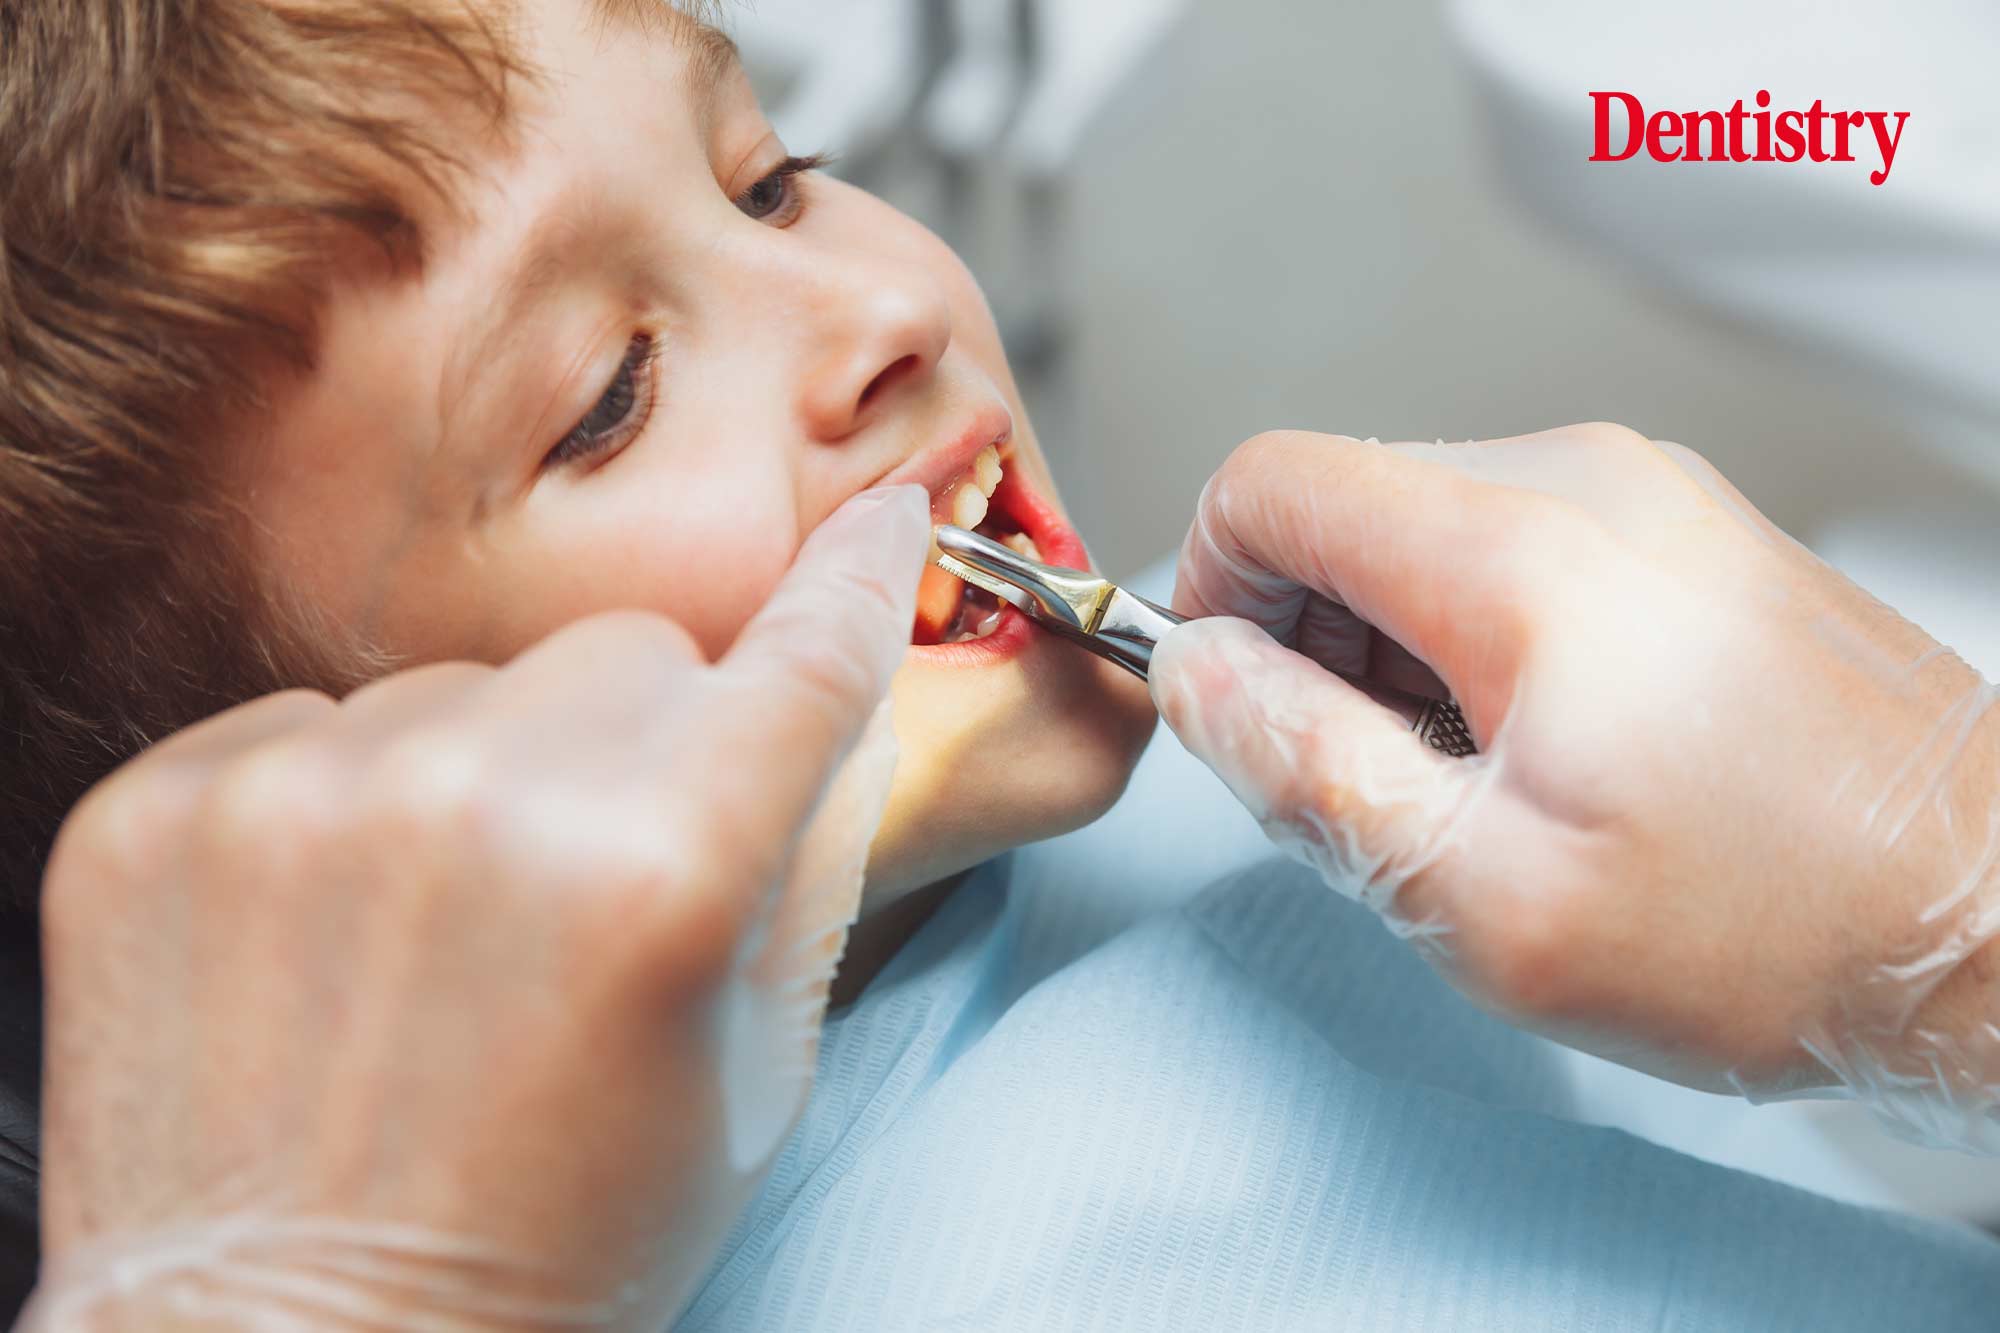 The number of children attending hospital for tooth extractions has risen by 17%, government figures show.